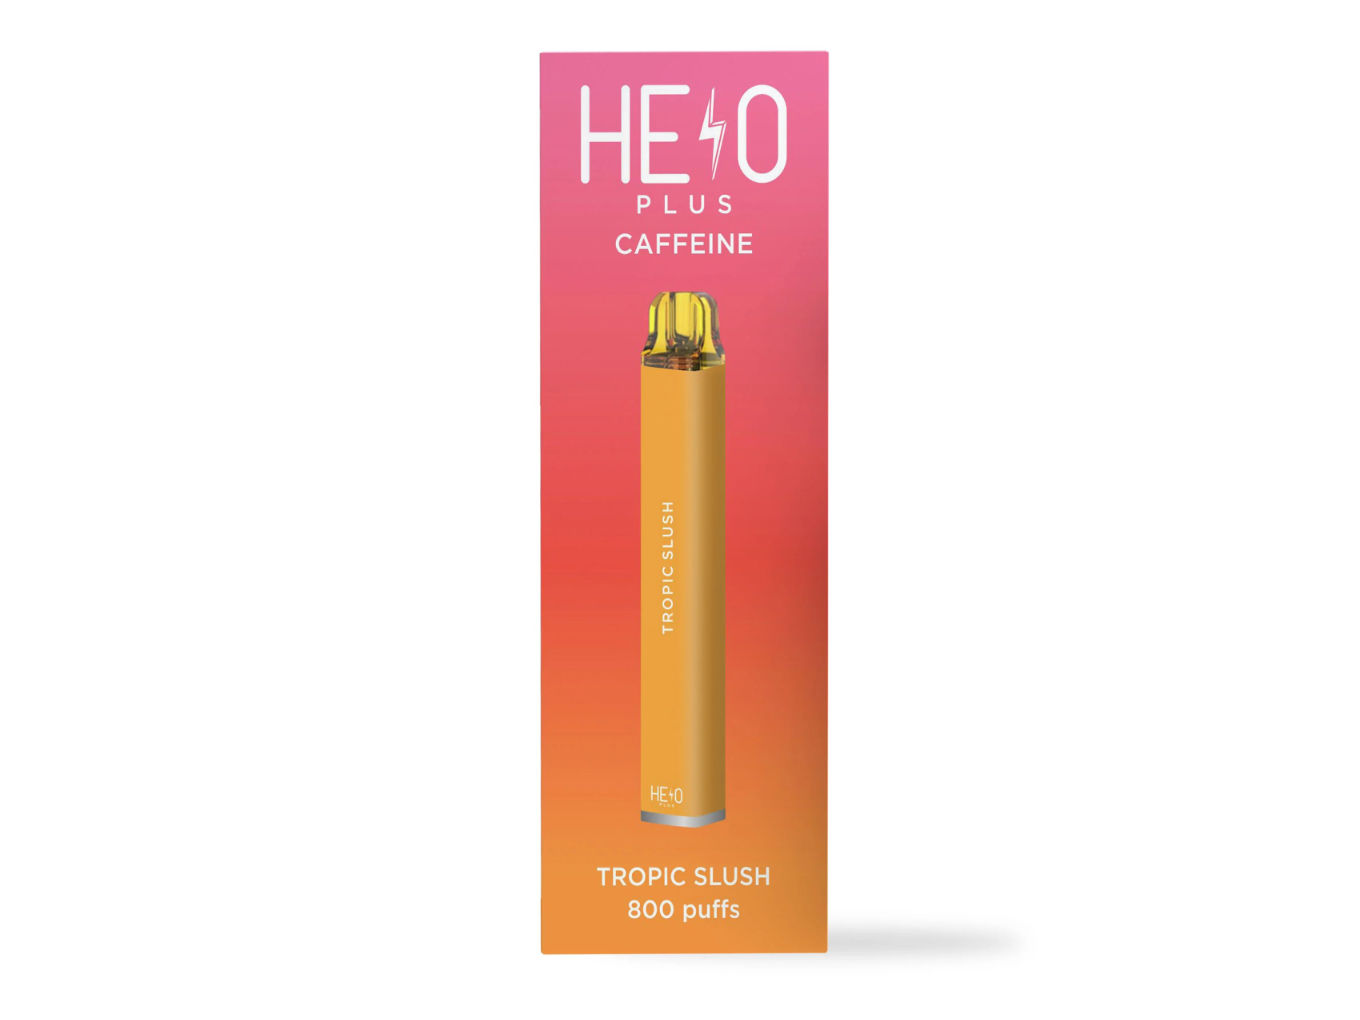 HELO Plus Caffeine Diffusers pack the jolt of energy and alertness you need.